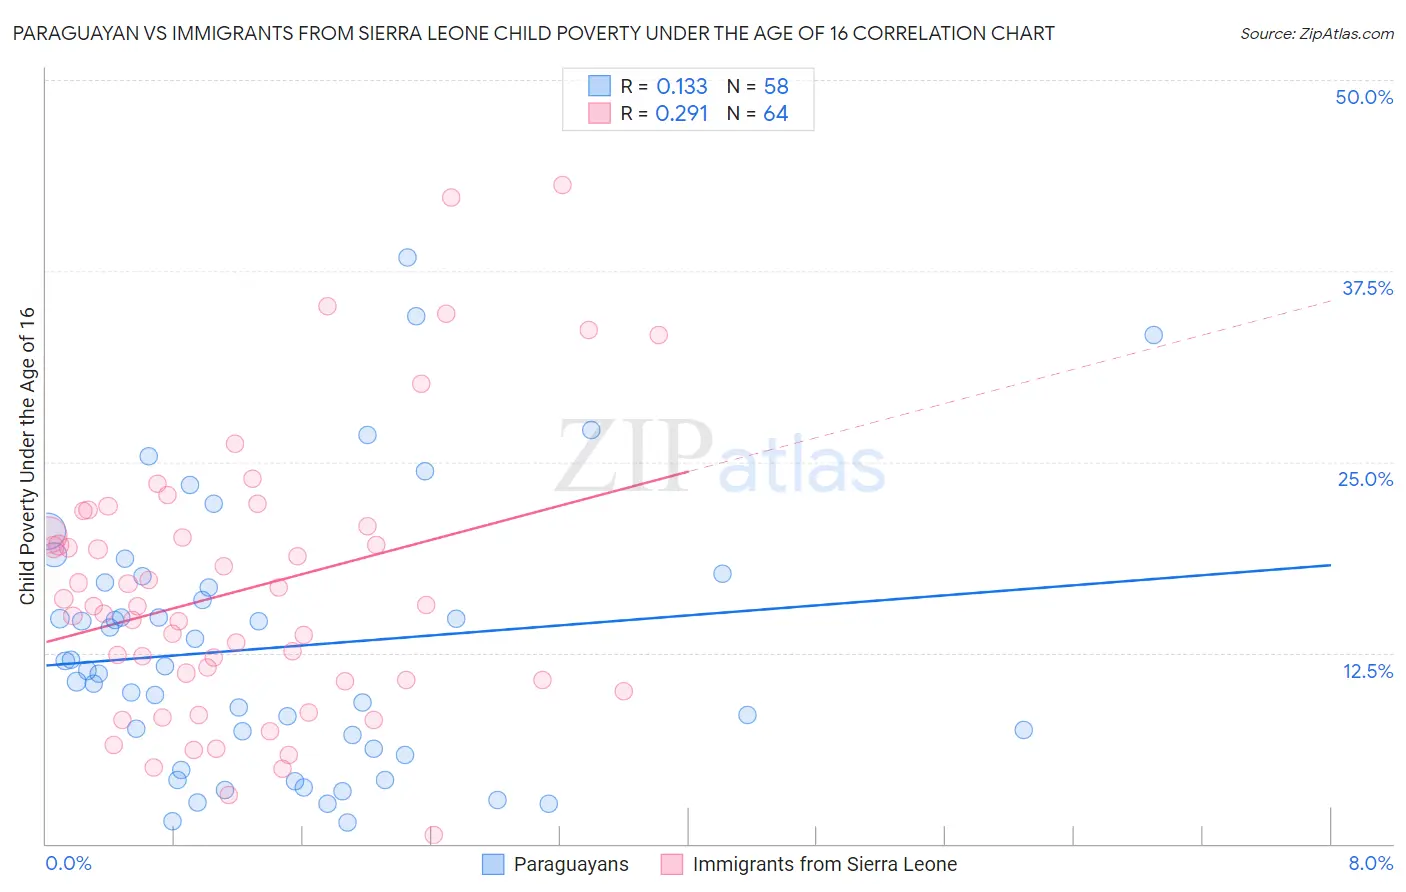 Paraguayan vs Immigrants from Sierra Leone Child Poverty Under the Age of 16